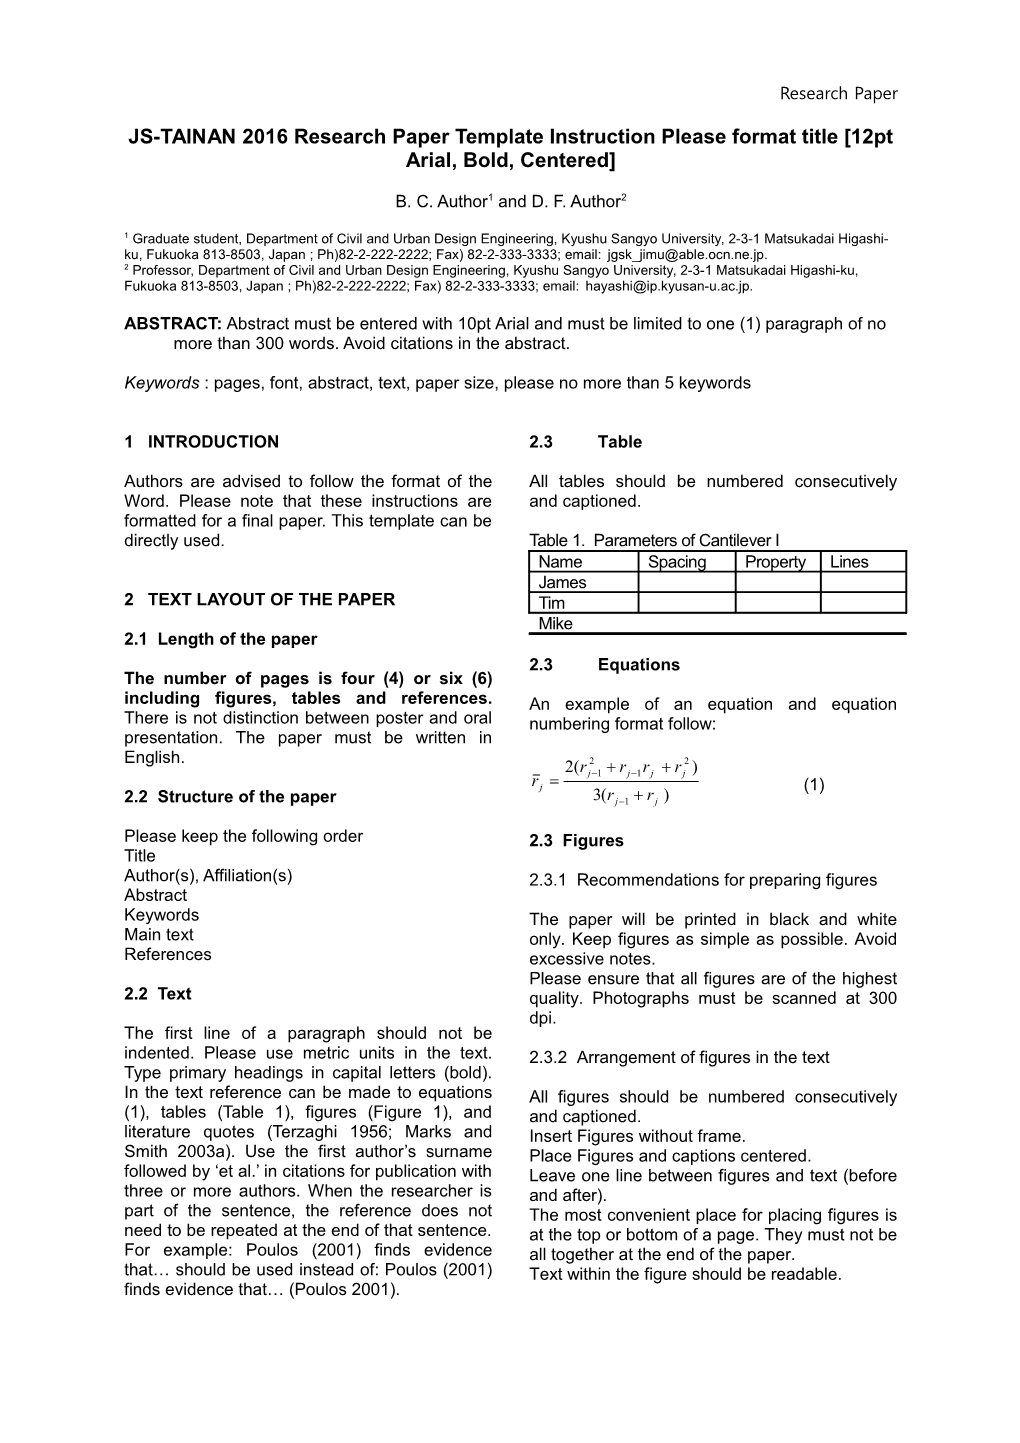 JS-TAINAN 2016 Research Paper Template Instruction Please Format Title 12Pt Arial, Bold